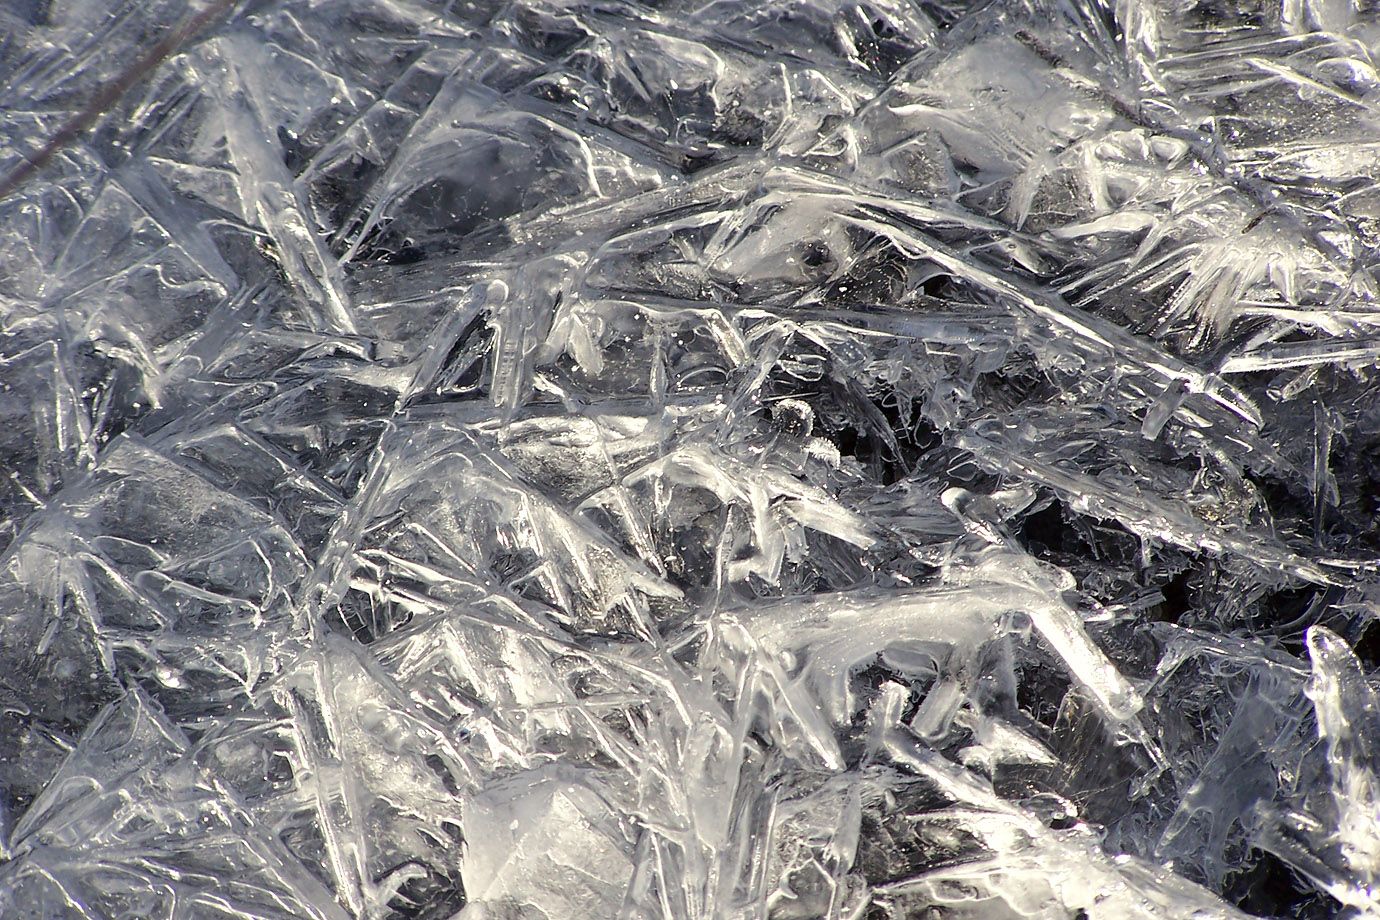 The ice forms bizzare structures